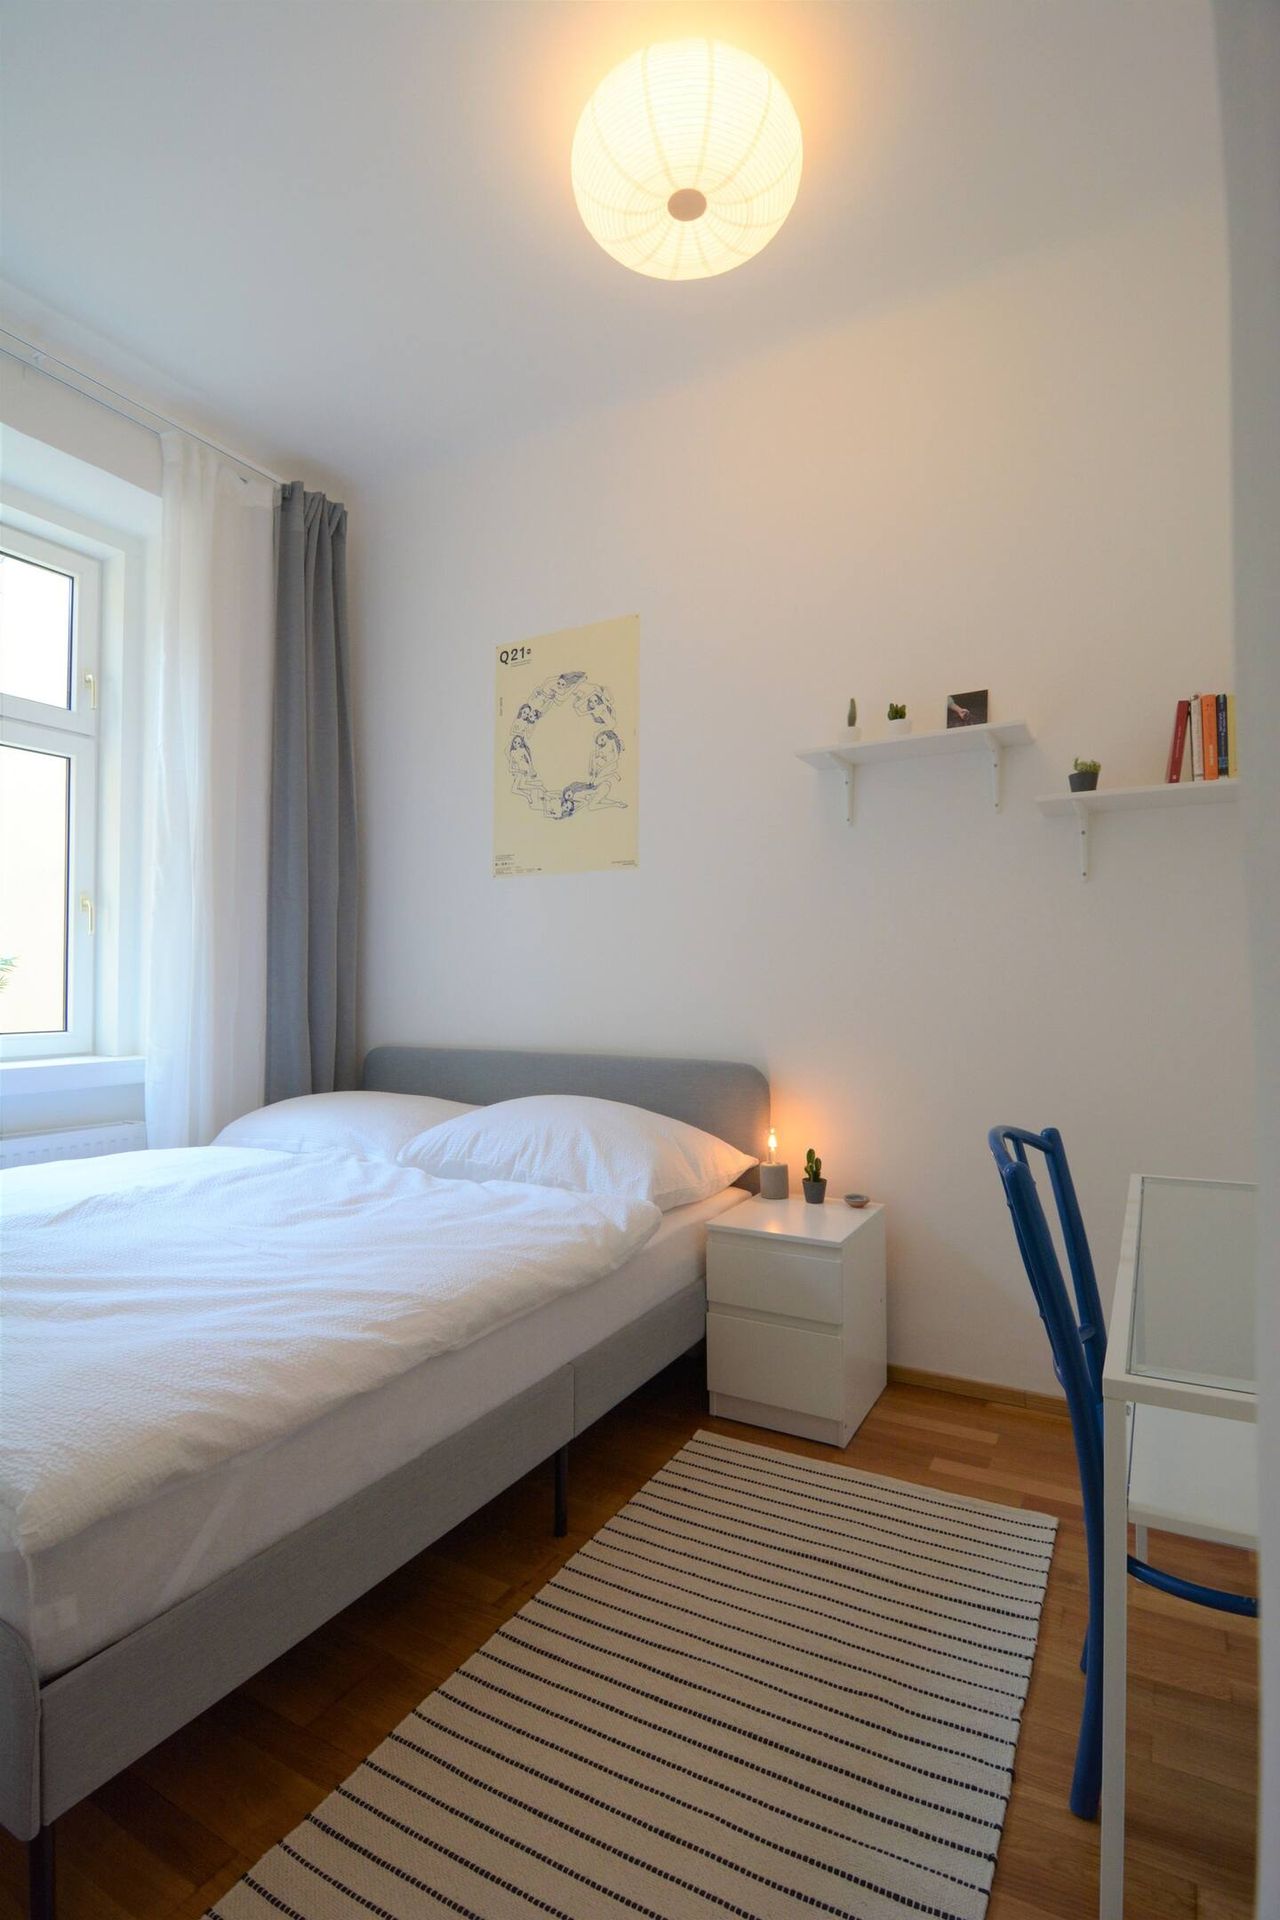 2-Rooms; Stay and relax! Near Vienna Main Station